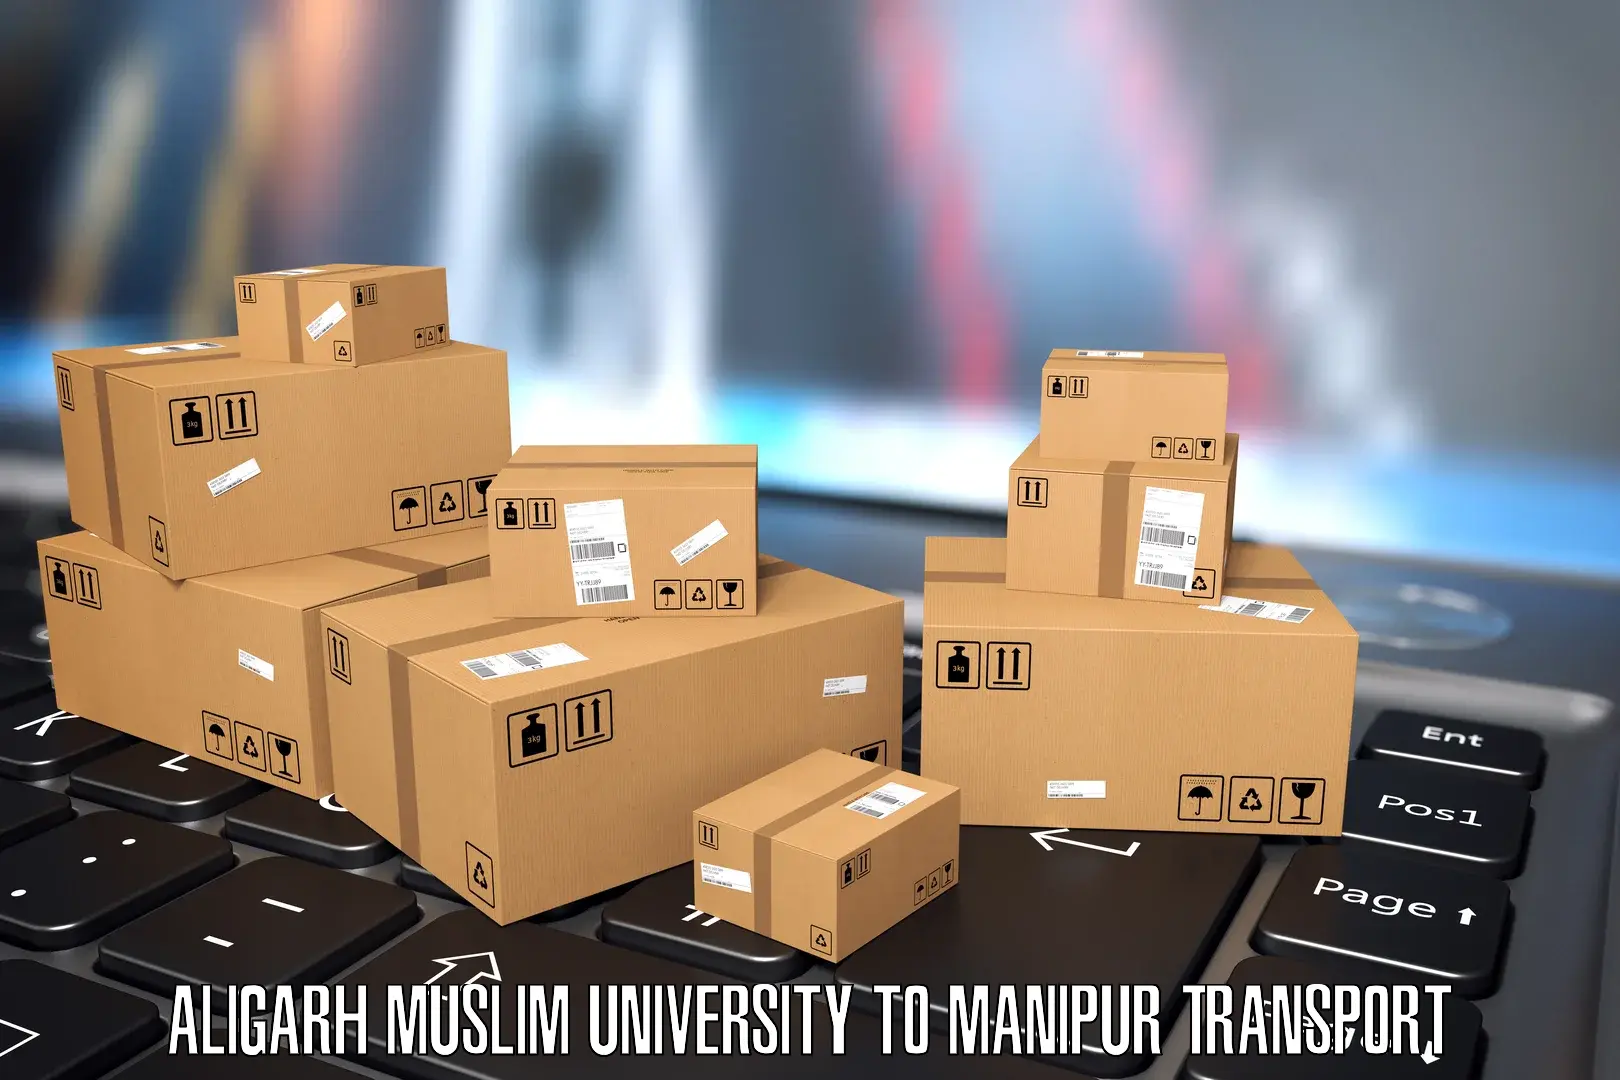 Goods delivery service Aligarh Muslim University to Manipur